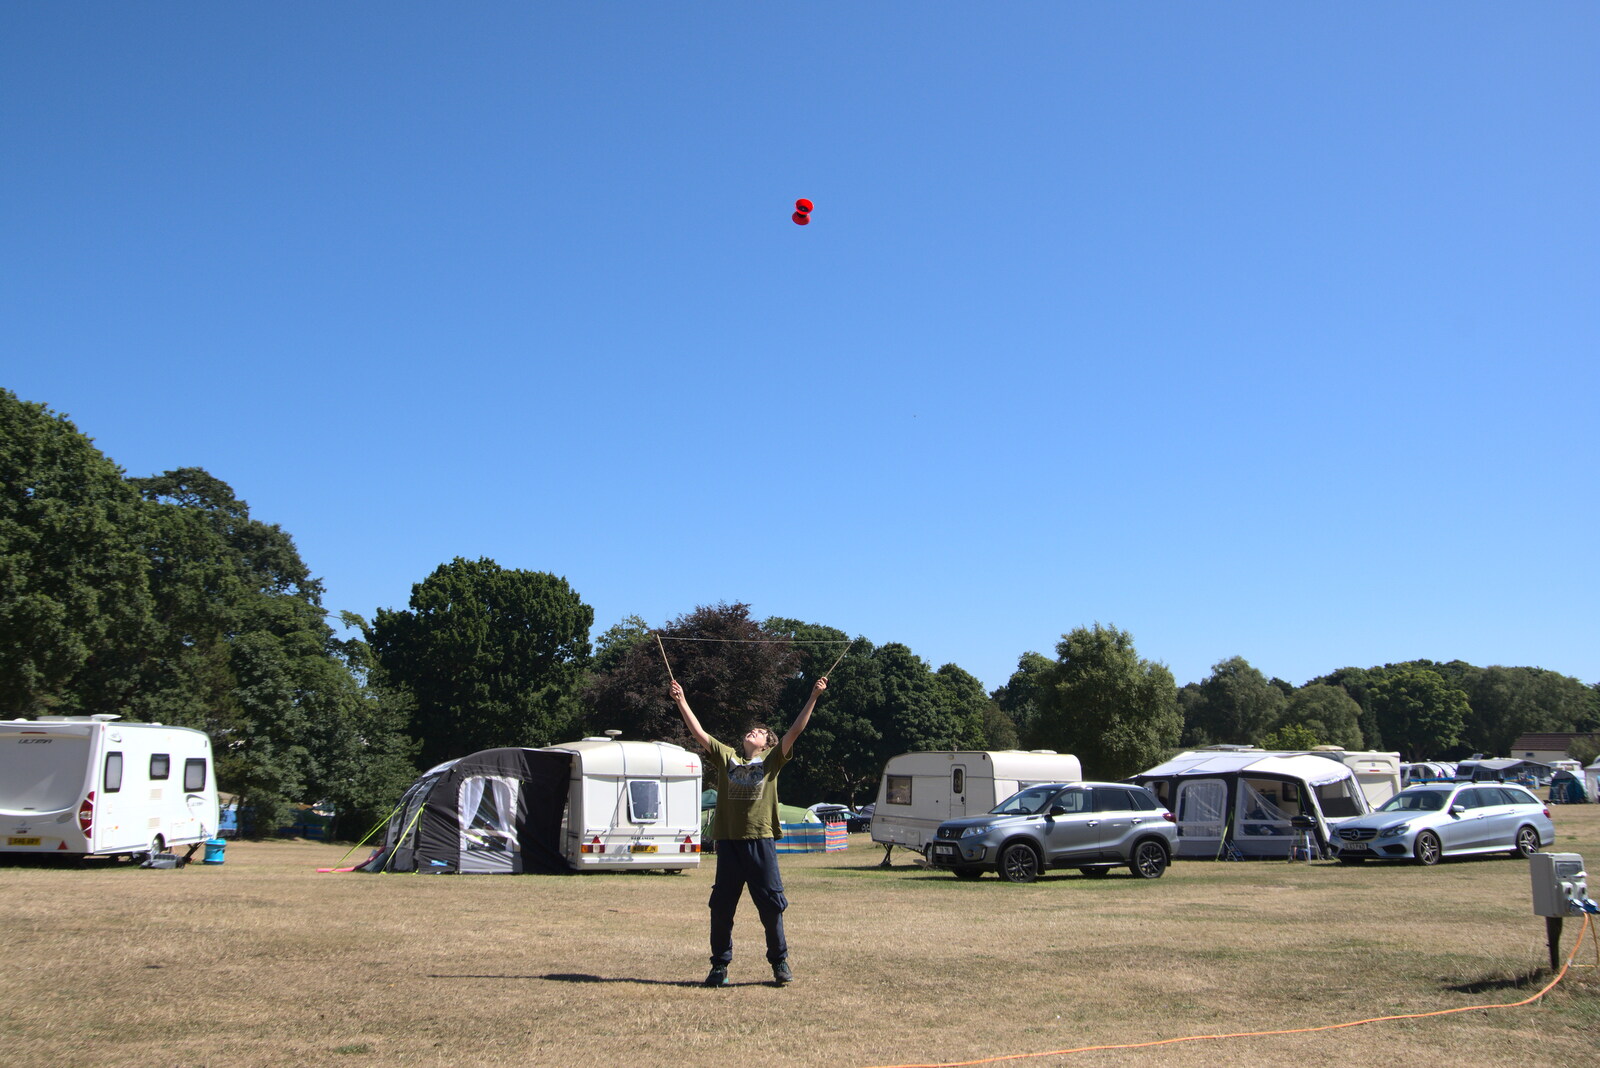 Fred flings the diablo high up in the air from Camping at Forest Park, Cromer, Norfolk - 12th August 2022